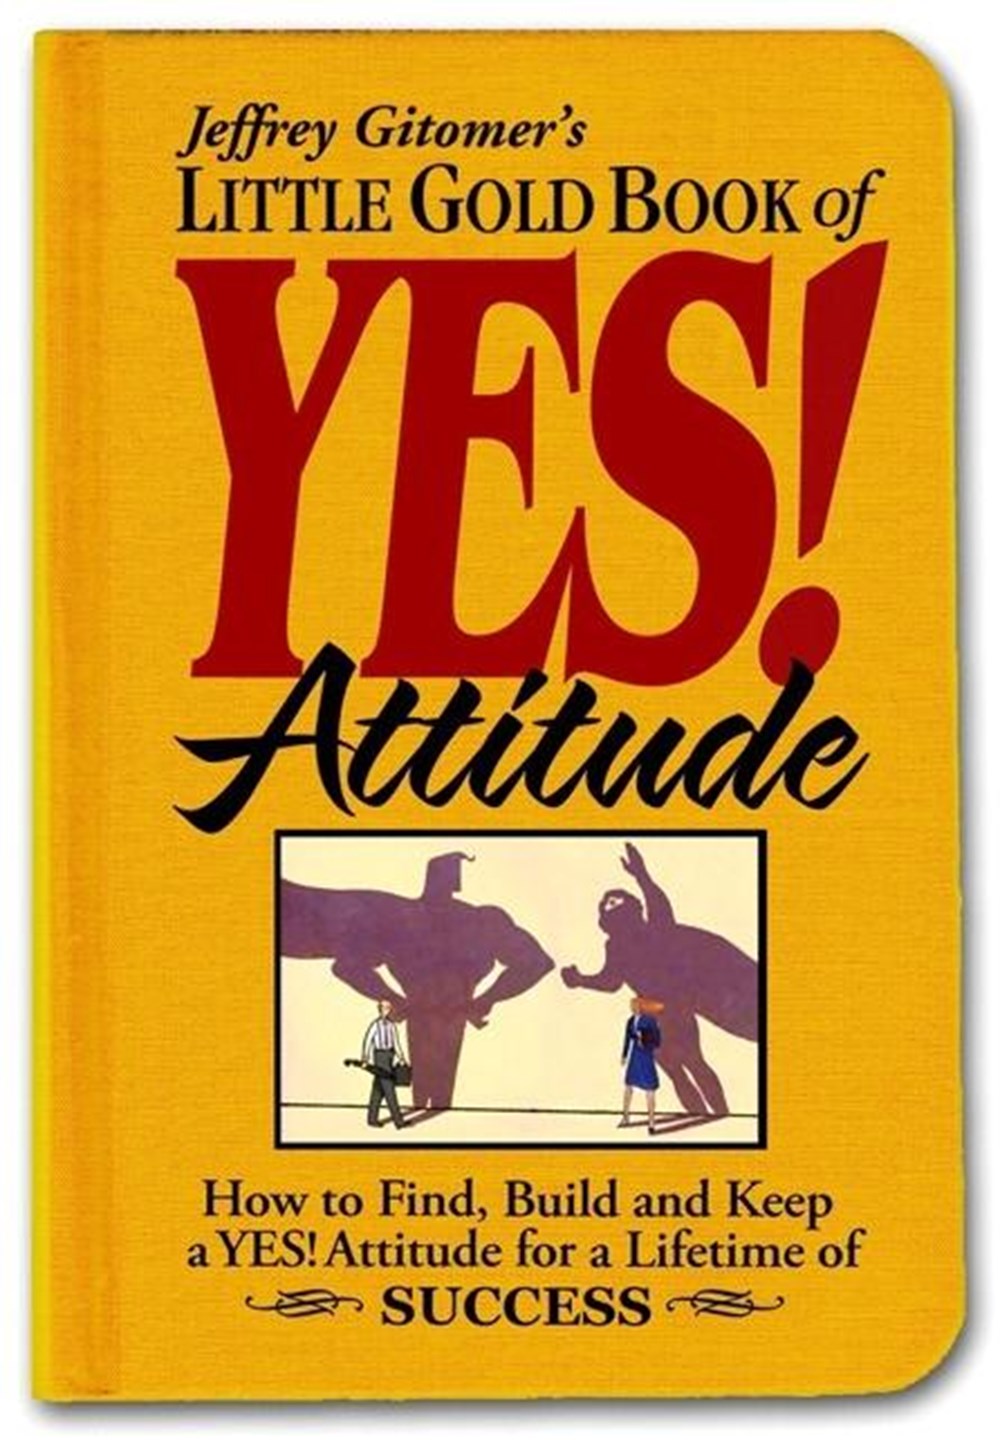 Little Gold Book of Yes! Attitude: How to Find, Build and Keep a Yes! Attitude for a Lifetime of Suc